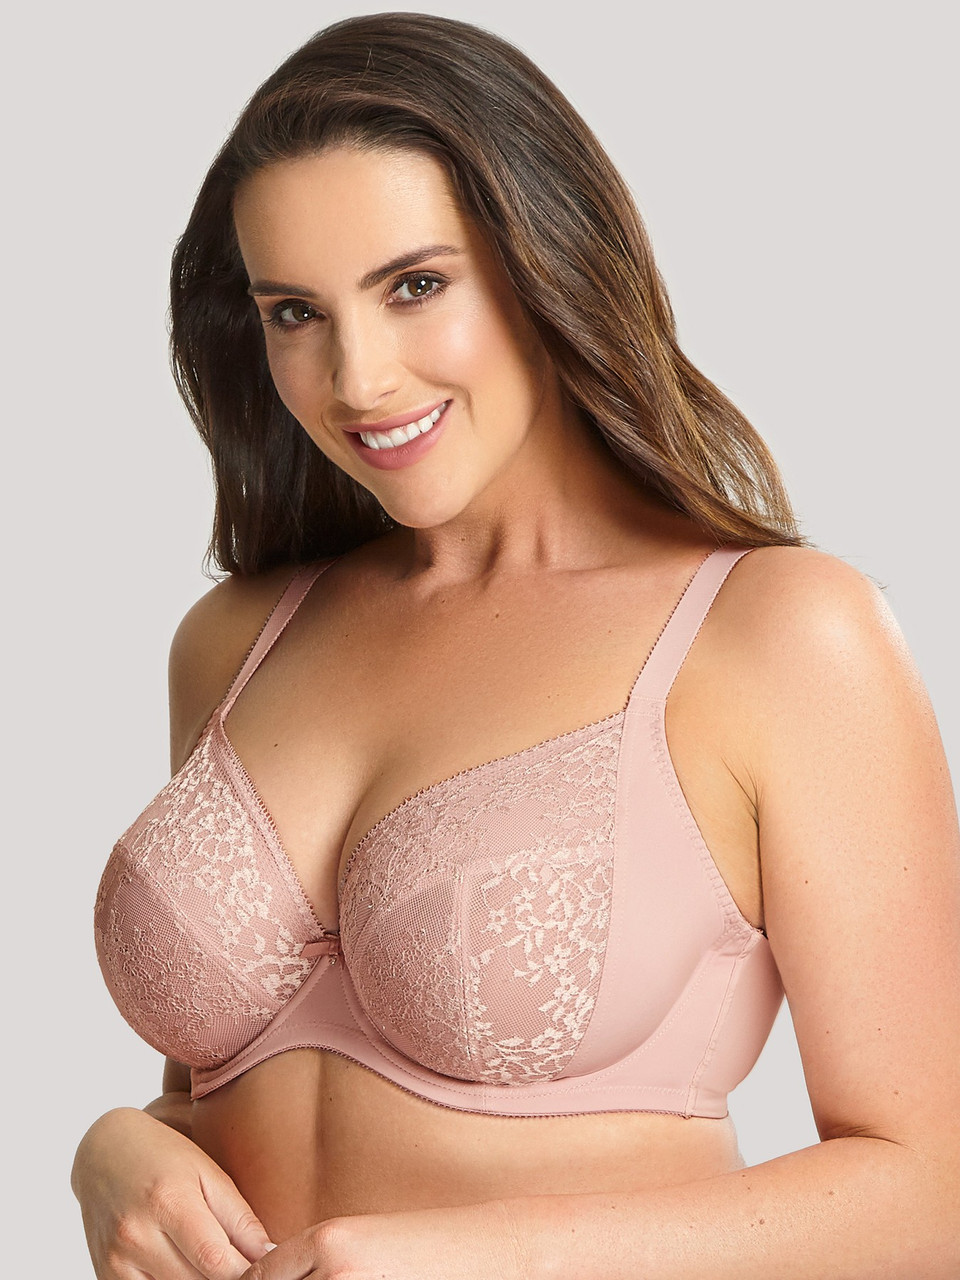 Plus Size Bras, Sexy Bras for Plus Size, Bigger & Full Figure Bras Tagged  Roxie - HauteFlair